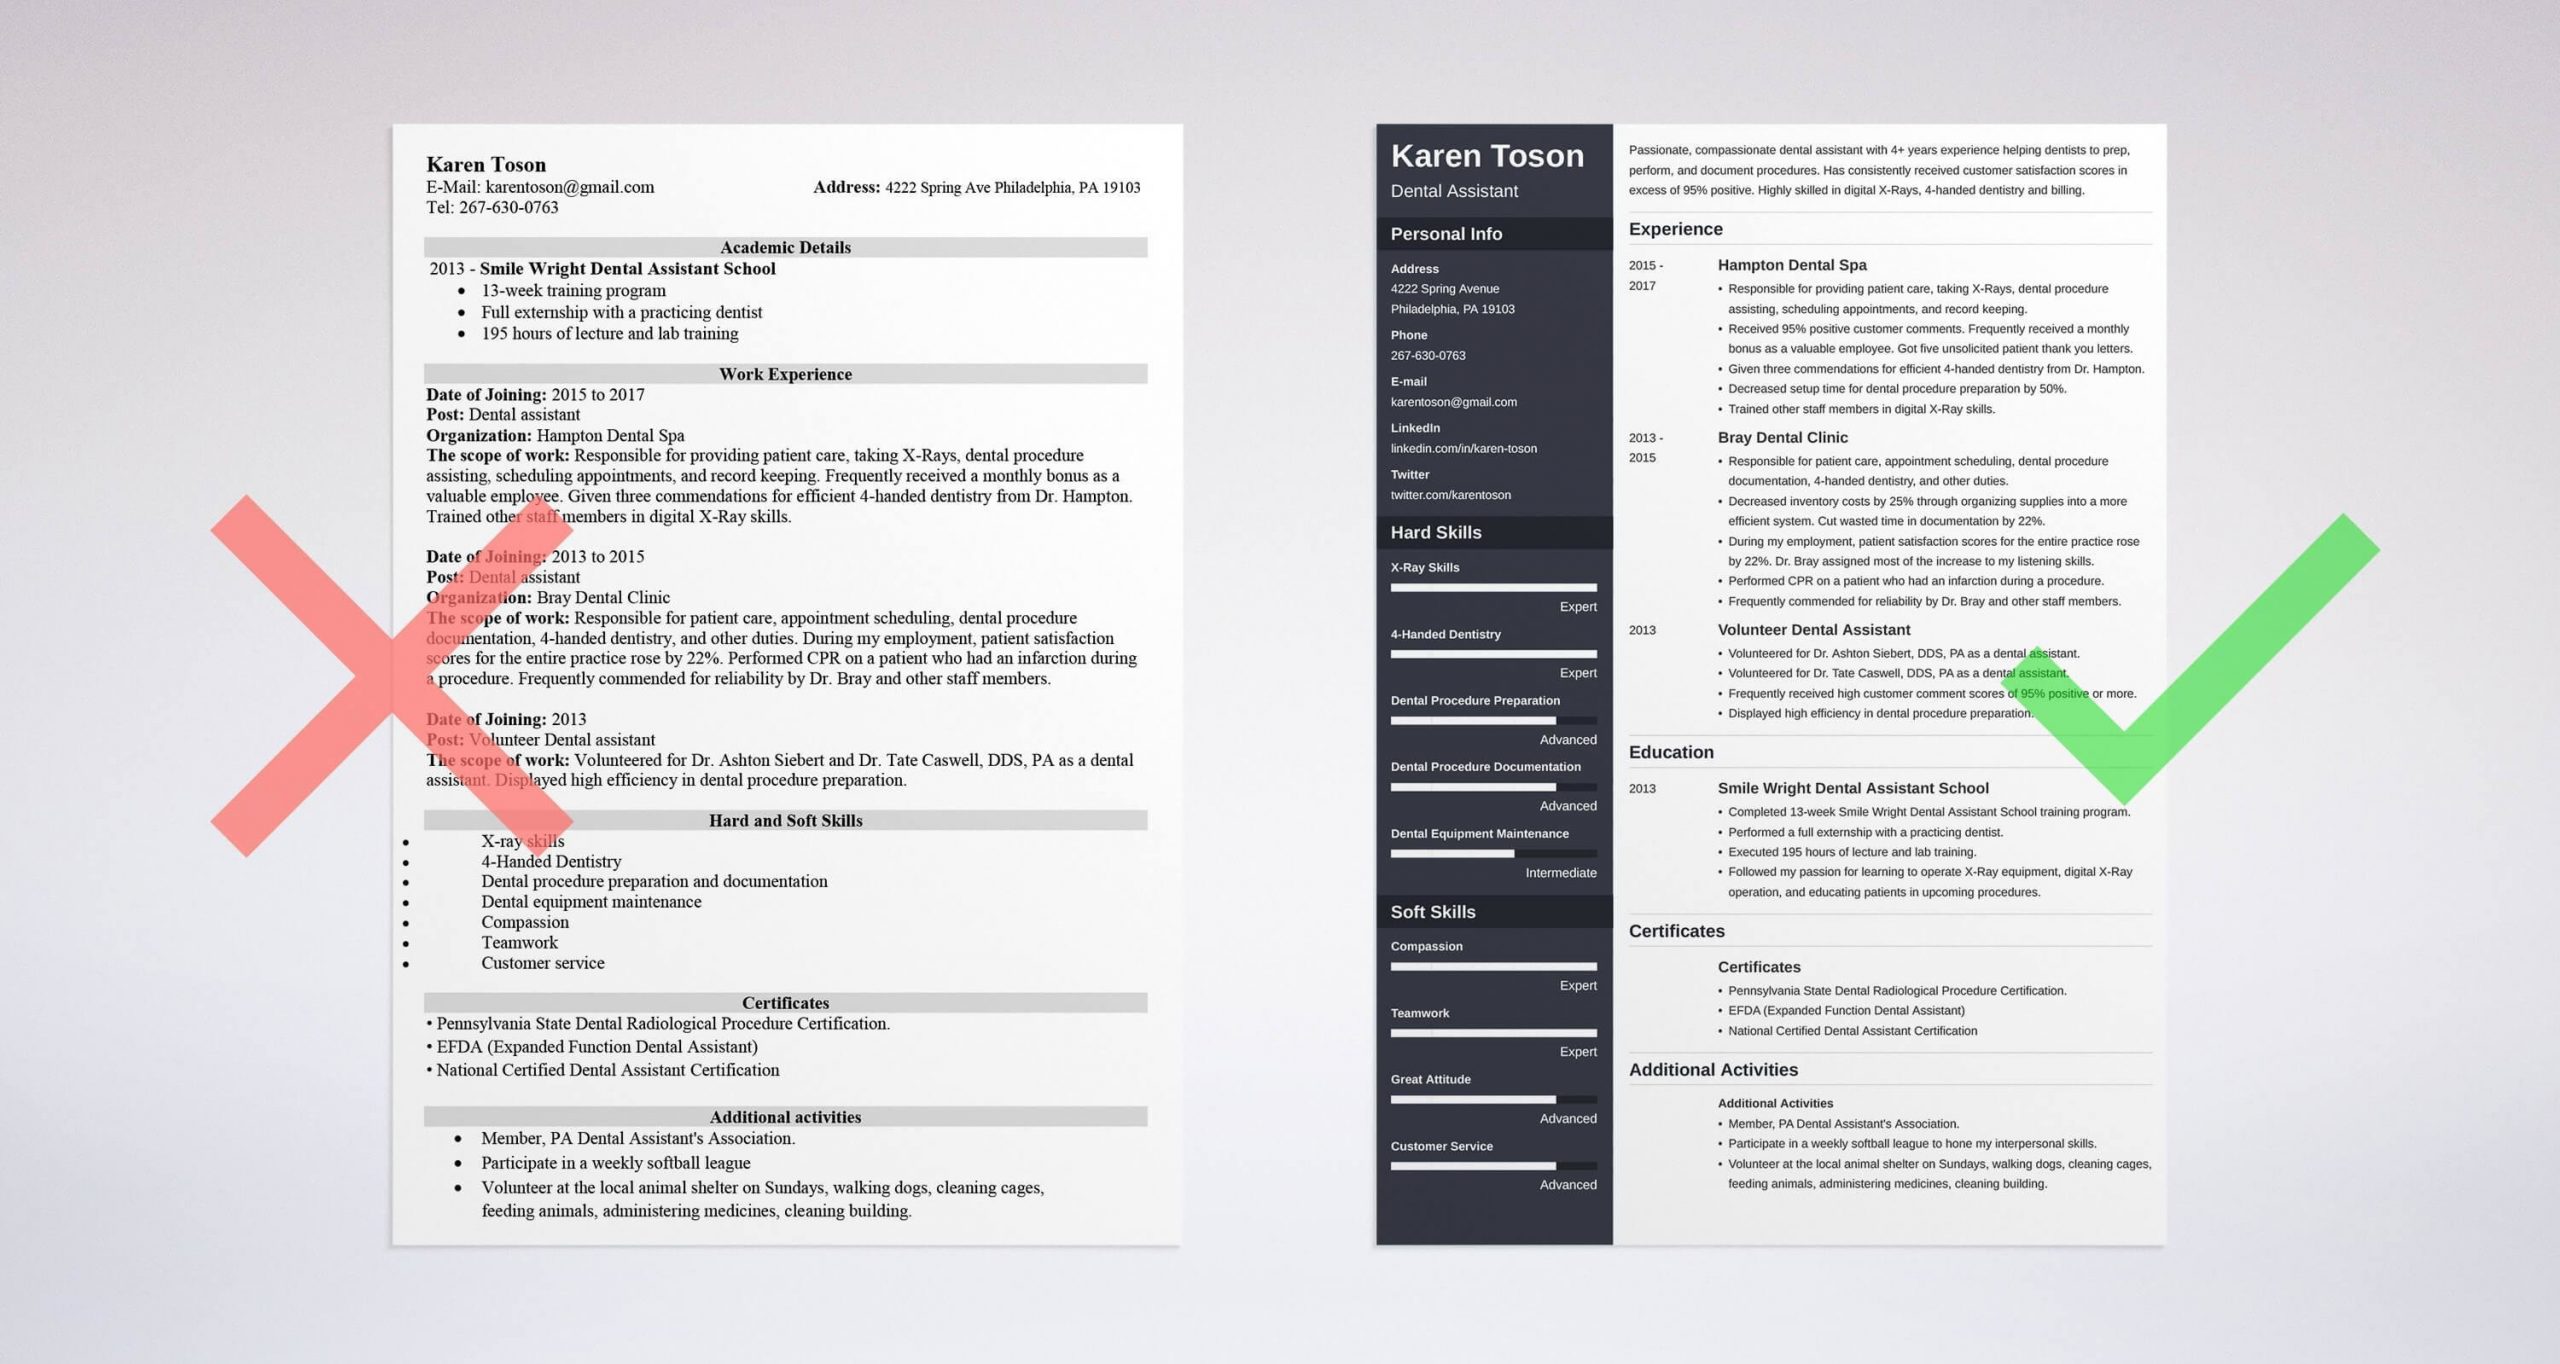 Sample Resume for Dental assistant with No Experience Dental assistant Resume Sample [lancarrezekiqtemplate & Skills]